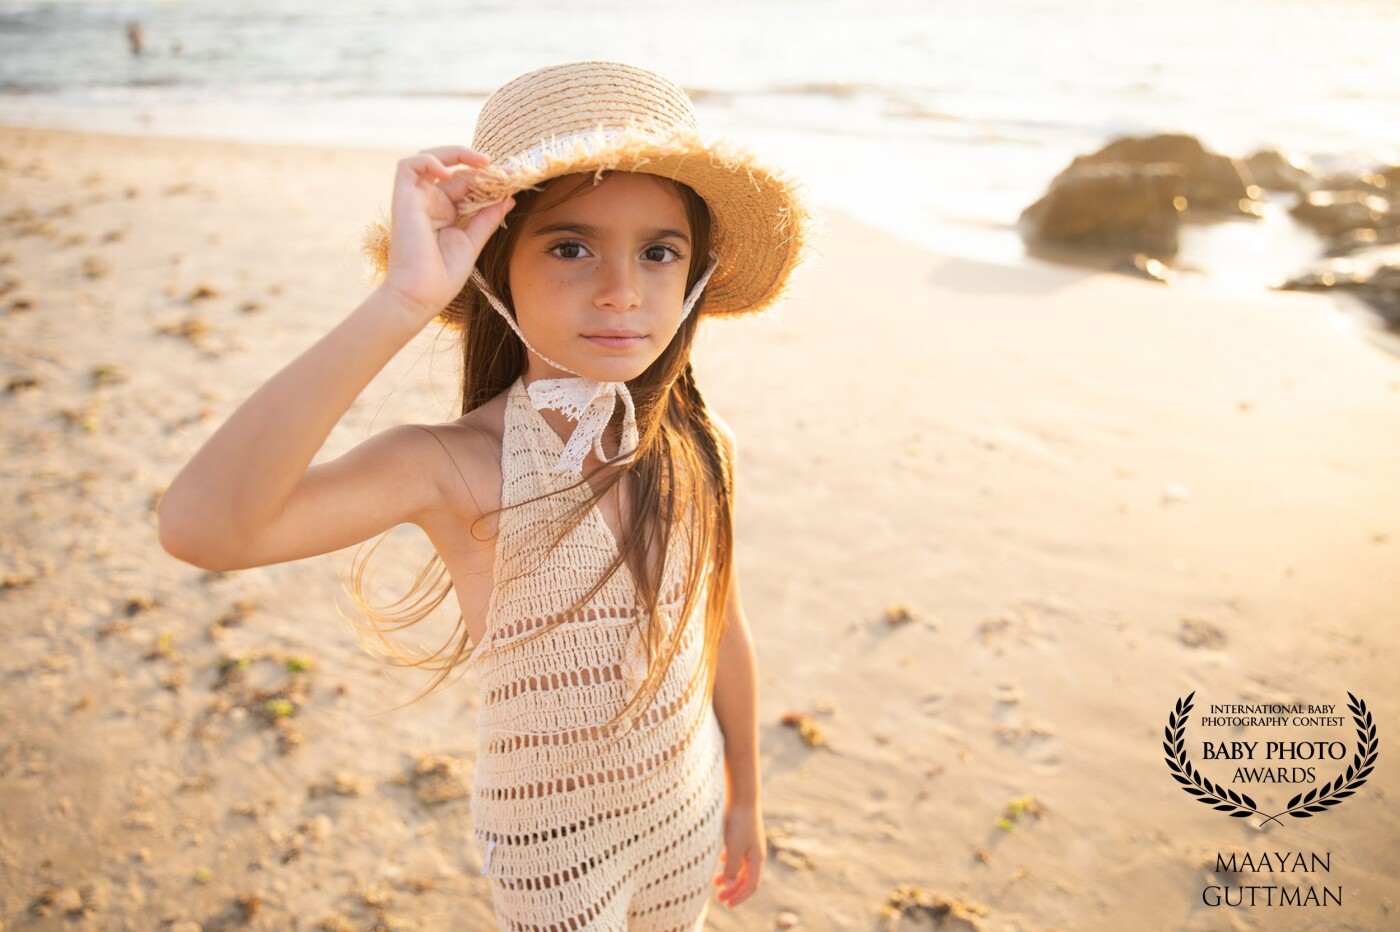 Last summer I went to the beach for a photoshoot with this beautiful girl named Adel. <br />
Her outfit is one of the reasons that made this photoshoot special since it was sewn for her by her grandmother for this sole purpose.